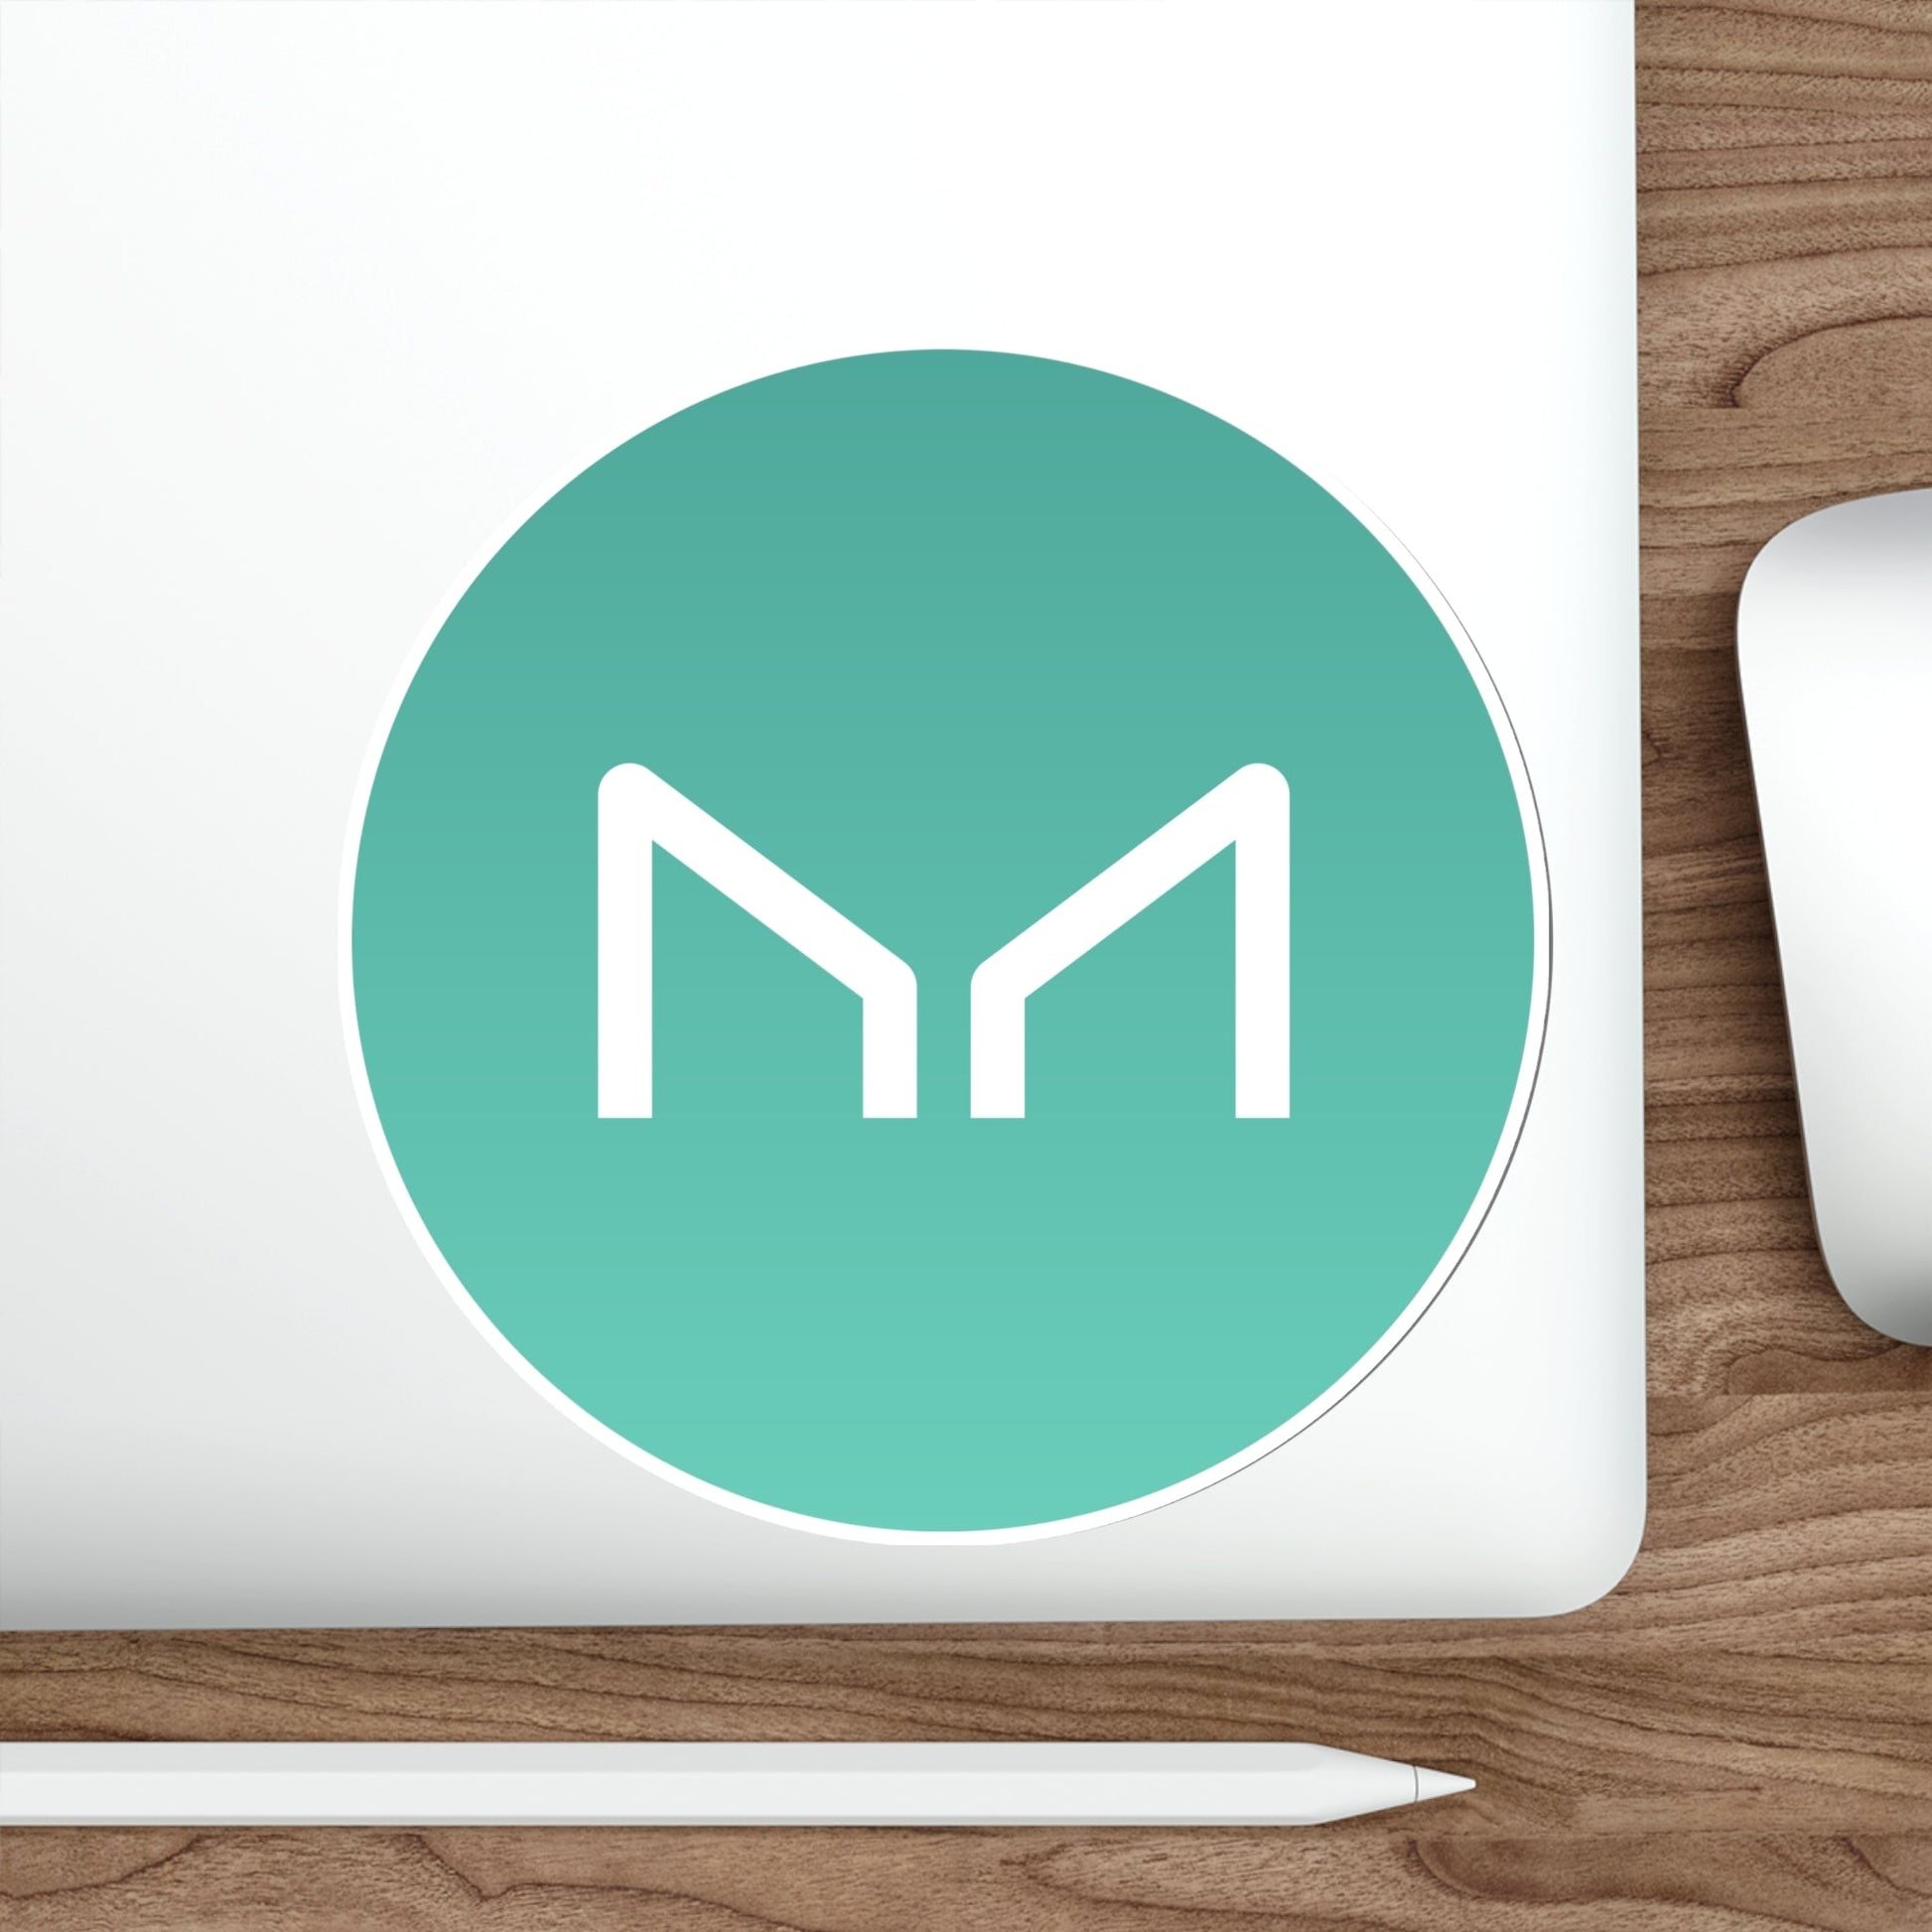 MAKER MKR (Cryptocurrency) STICKER Vinyl Die-Cut Decal-The Sticker Space